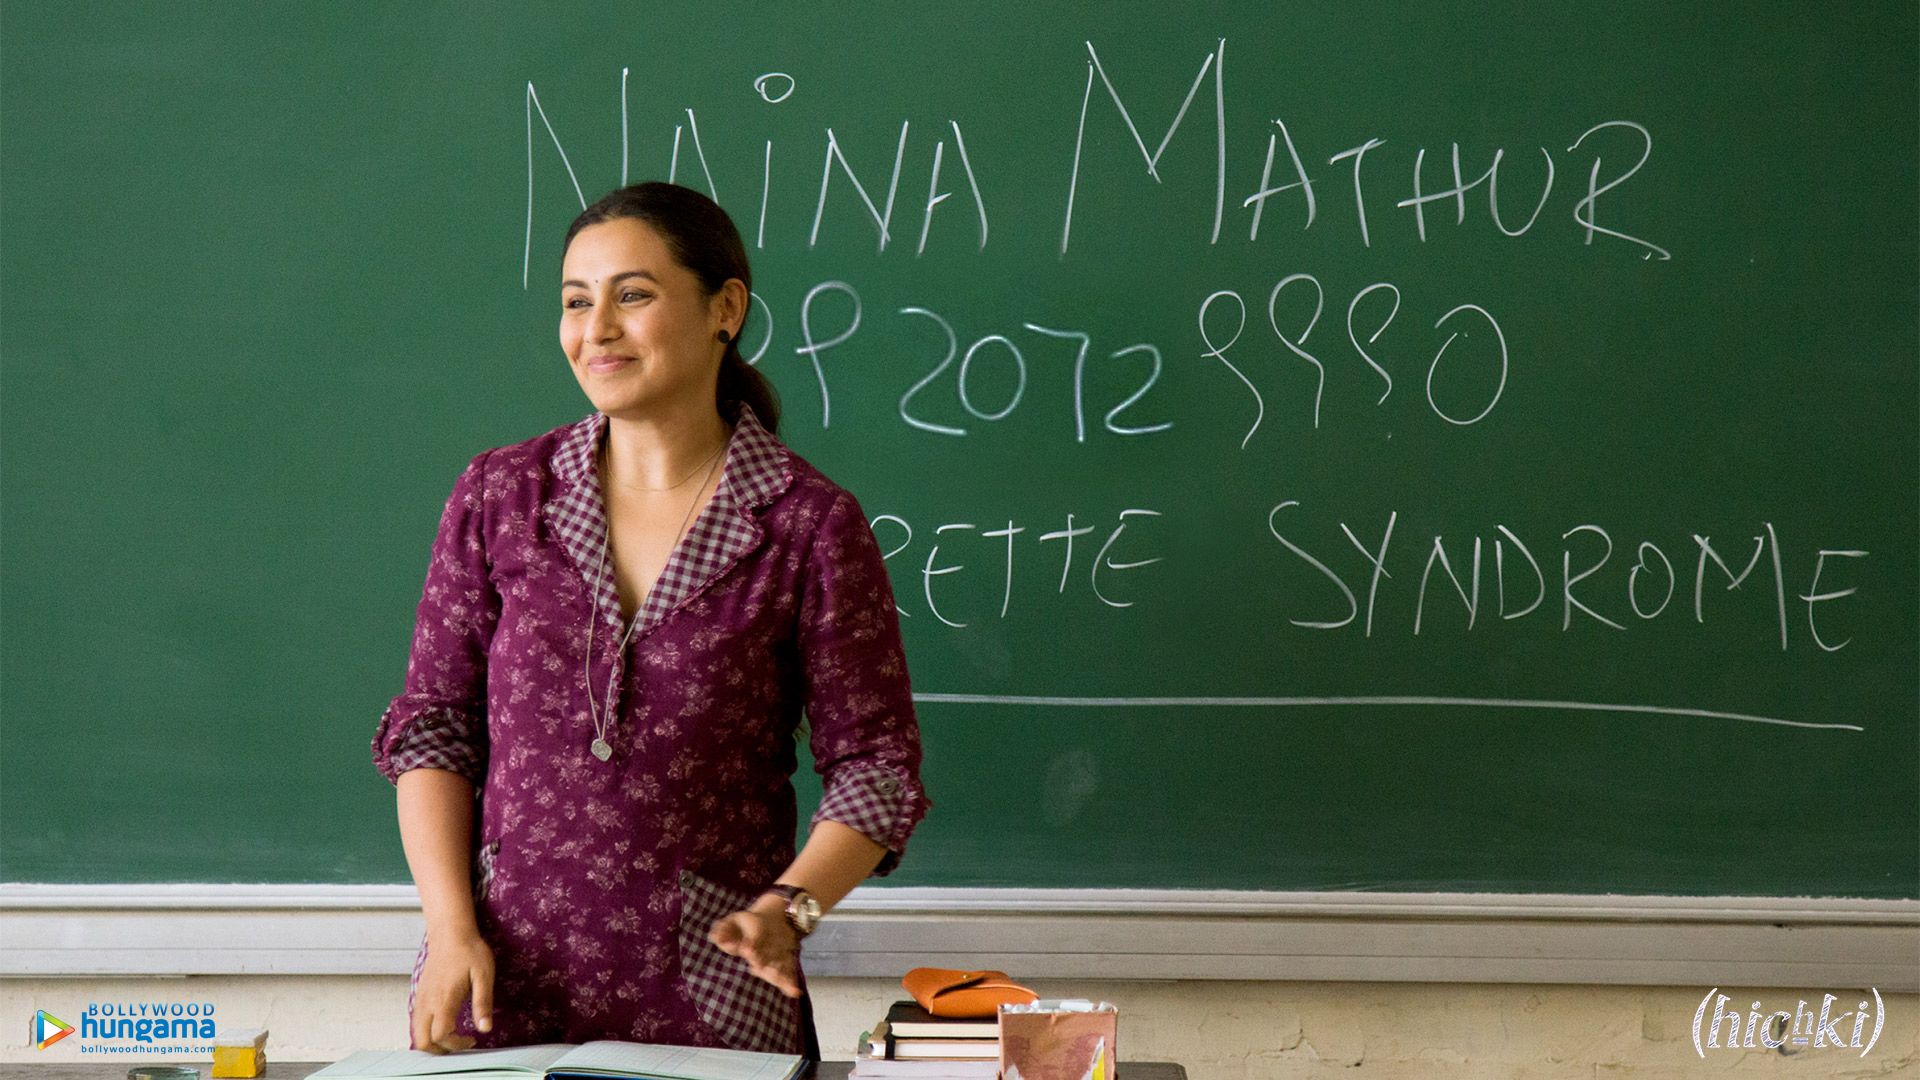 Naina Mathur, suffers from Tourette's, but given a chance to teach